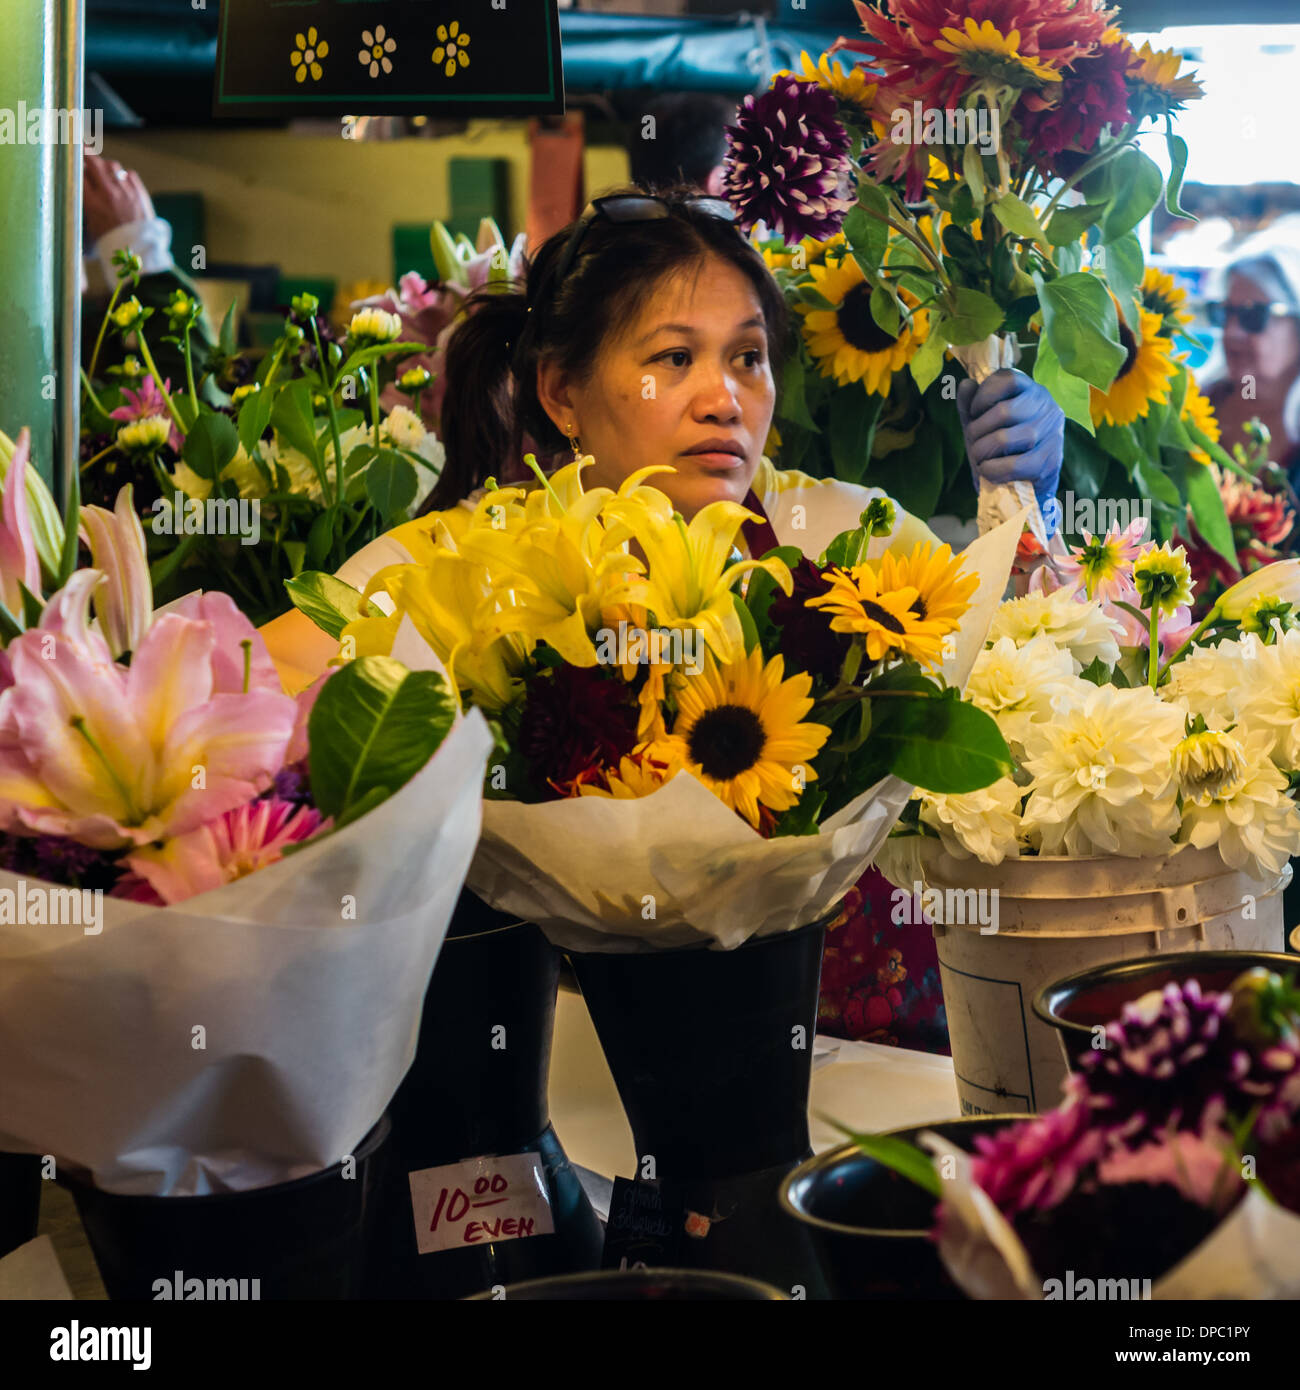 Flower seller with bouquet of flowers and tubs of fresh flowers at a market stall.  Pike Place Market, Seattle, Washington, USA Stock Photo